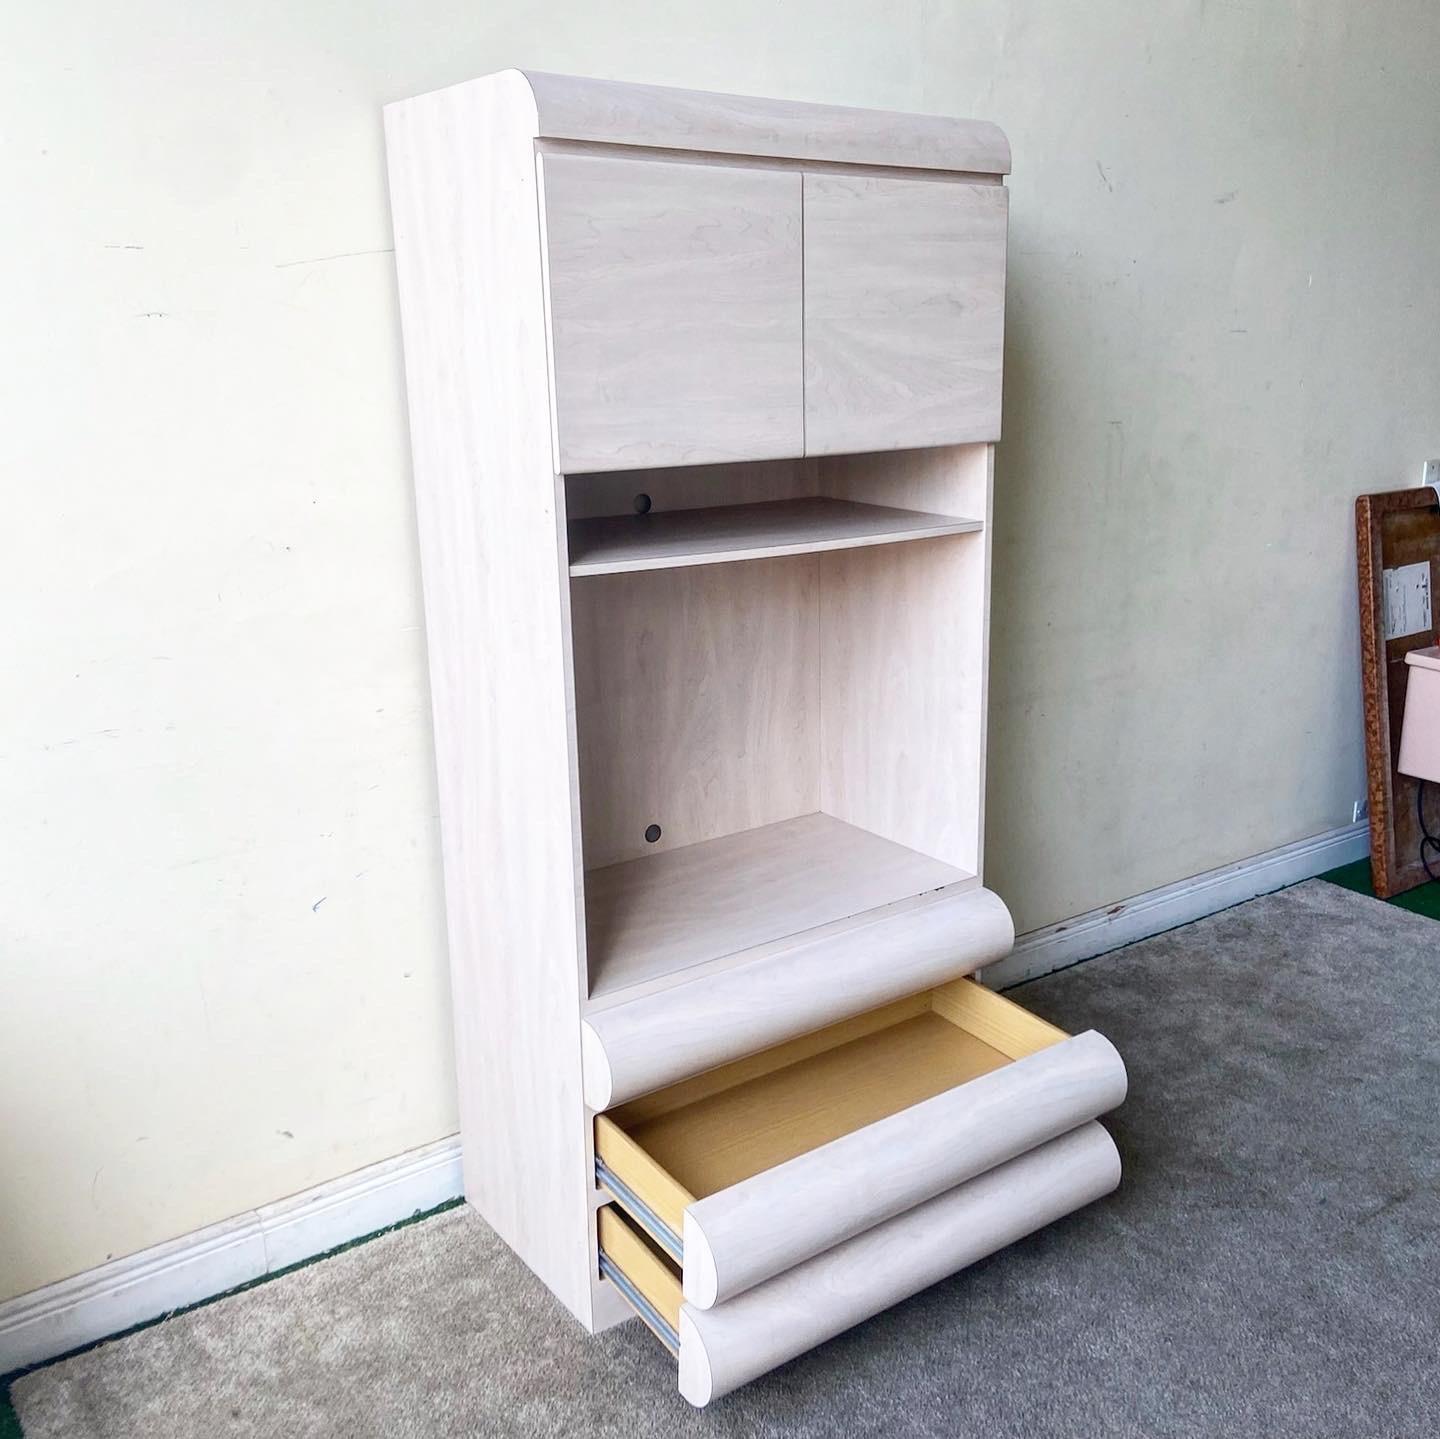 Amazing 1980s postmodern bullnose etagere. Features three spacious drawers with a large shelved open area, topped by a small cabinet section.